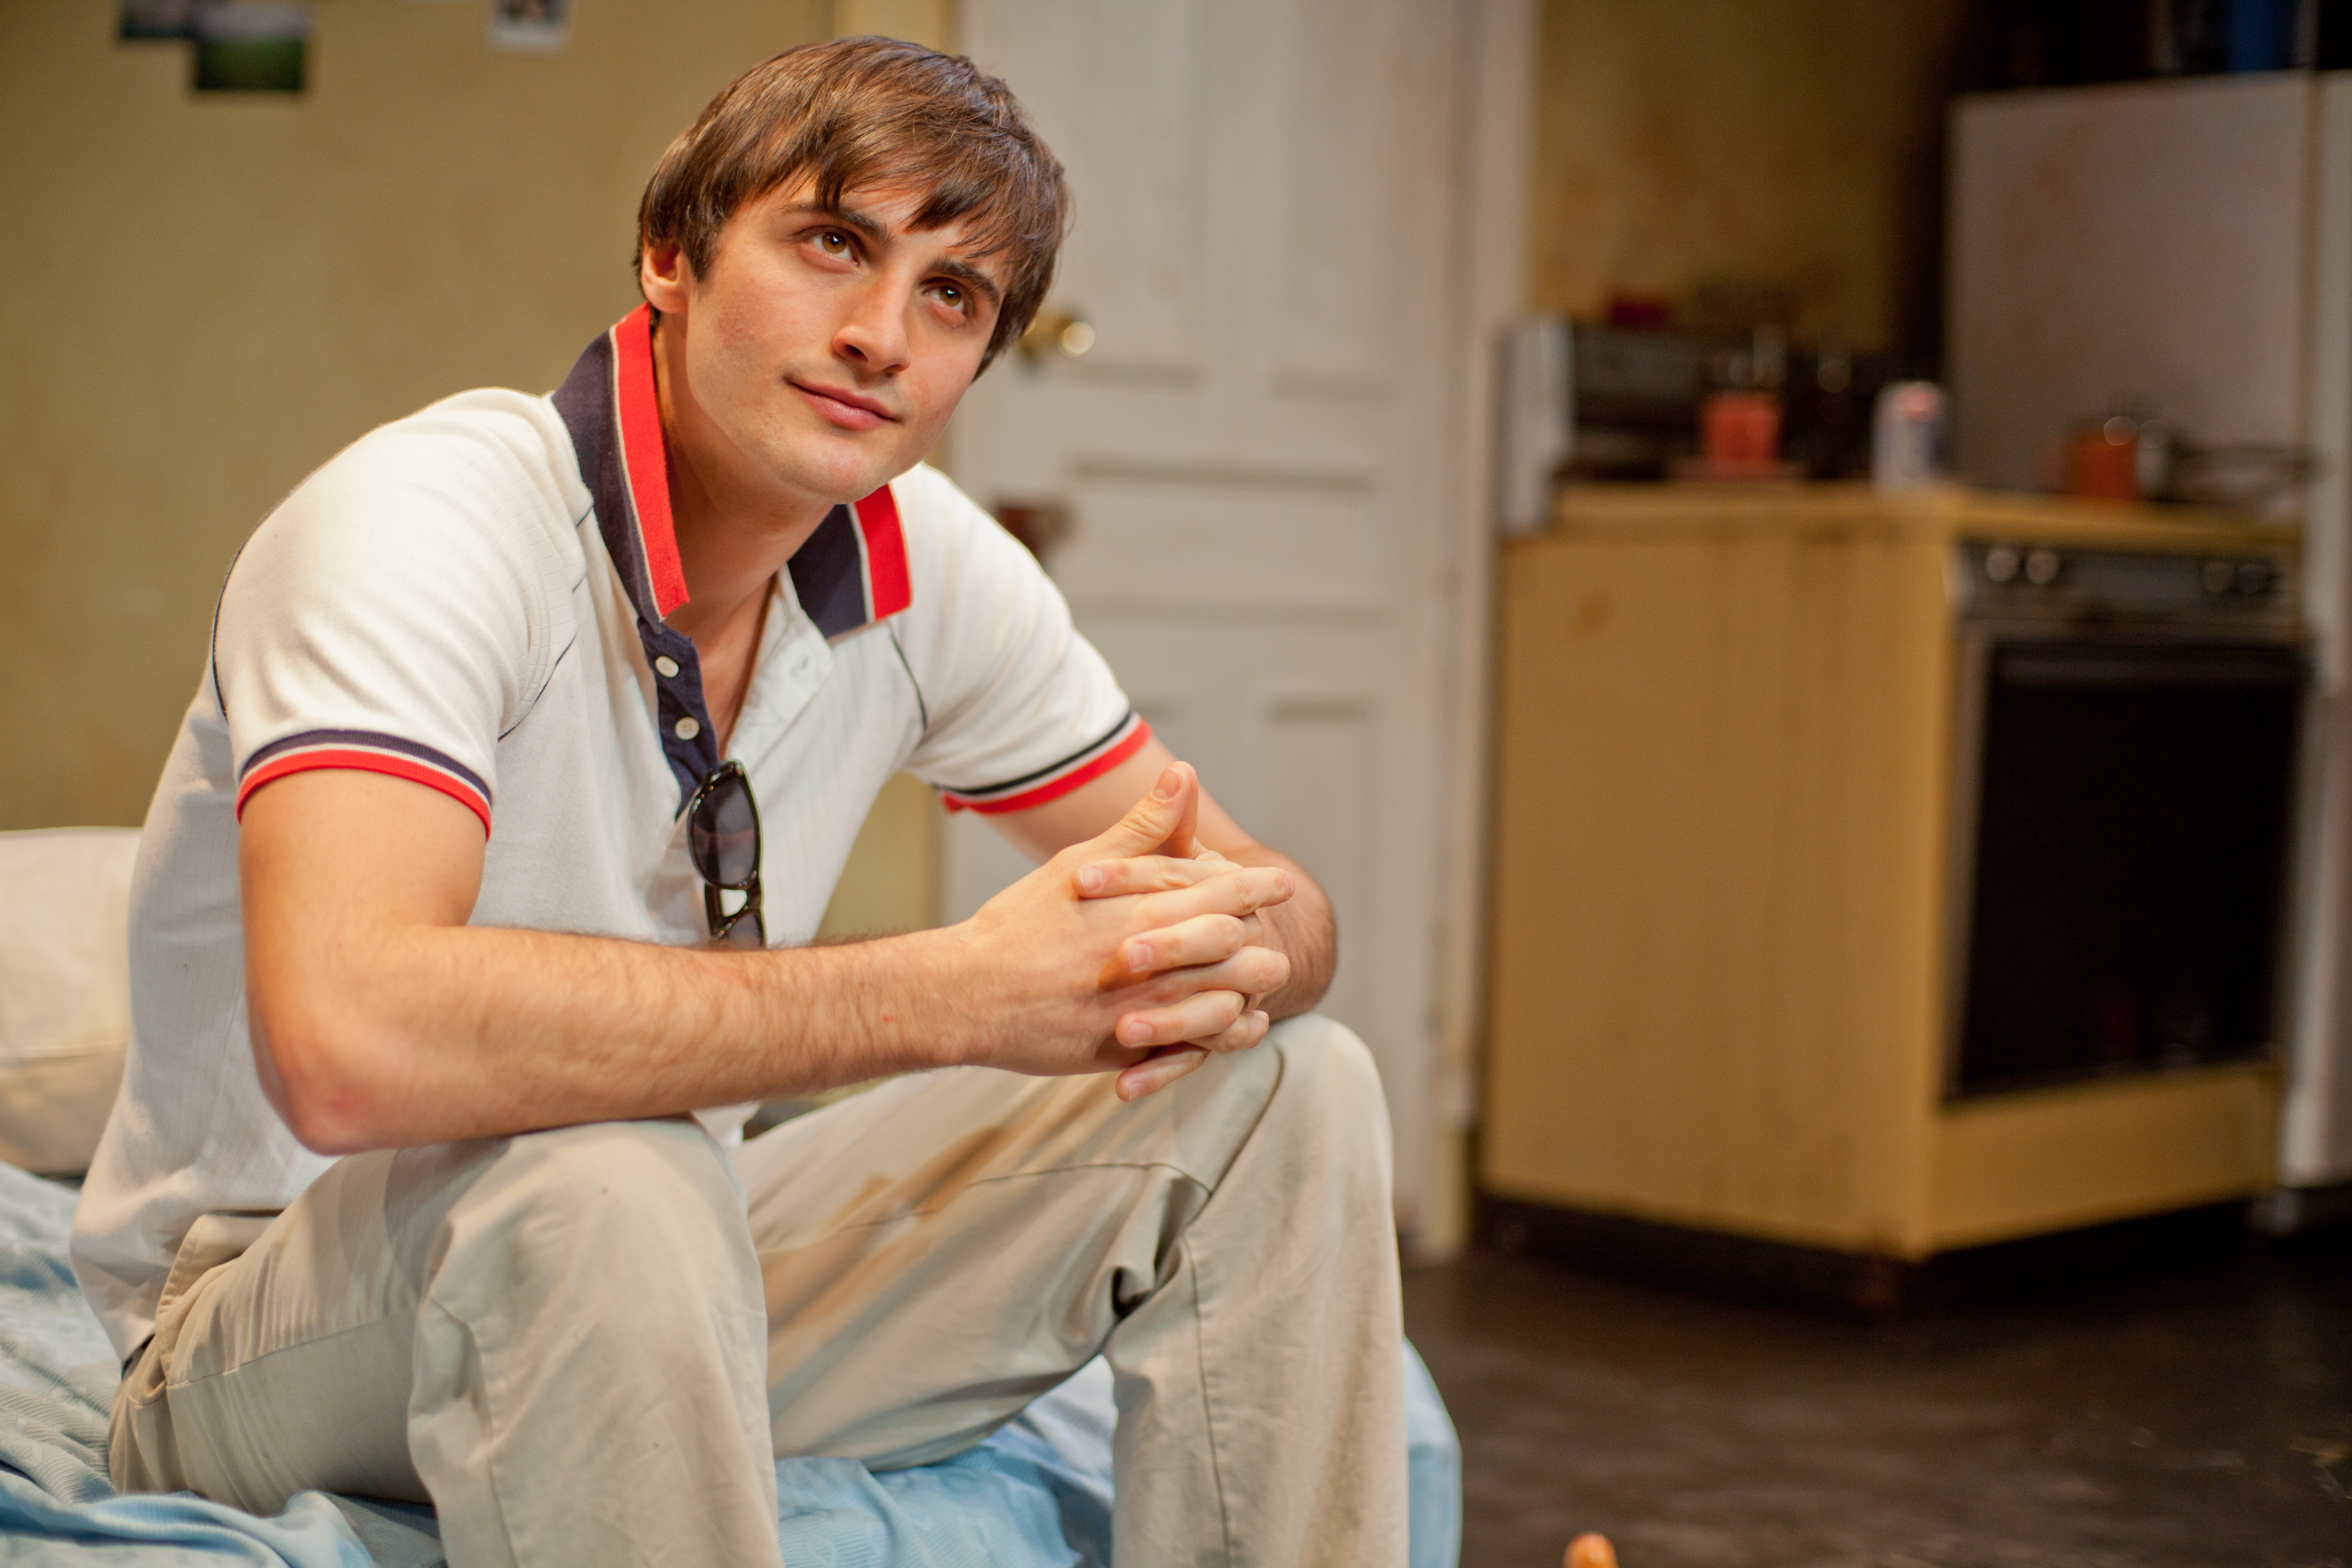 Lucas Salvagno as Dennis Ziegler in the 2012 Production of THIS IS OUR YOUTH @ The Wild Project